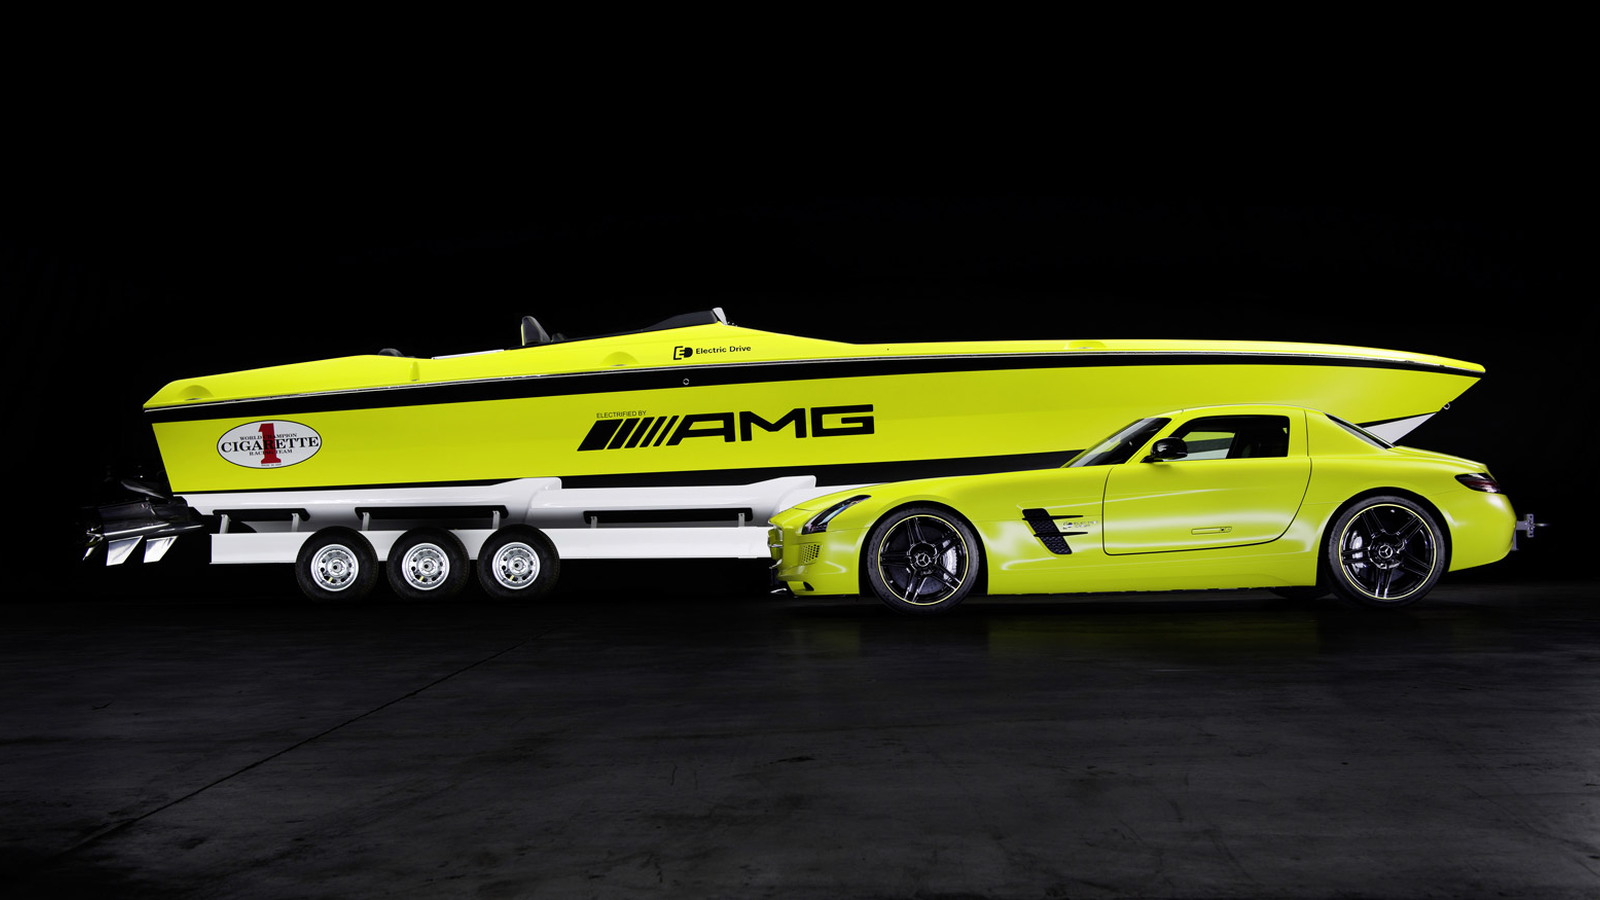 Cigarette AMG Electric Drive boat concept inspired by the Mercedes-Benz SLS AMG Electric Drive